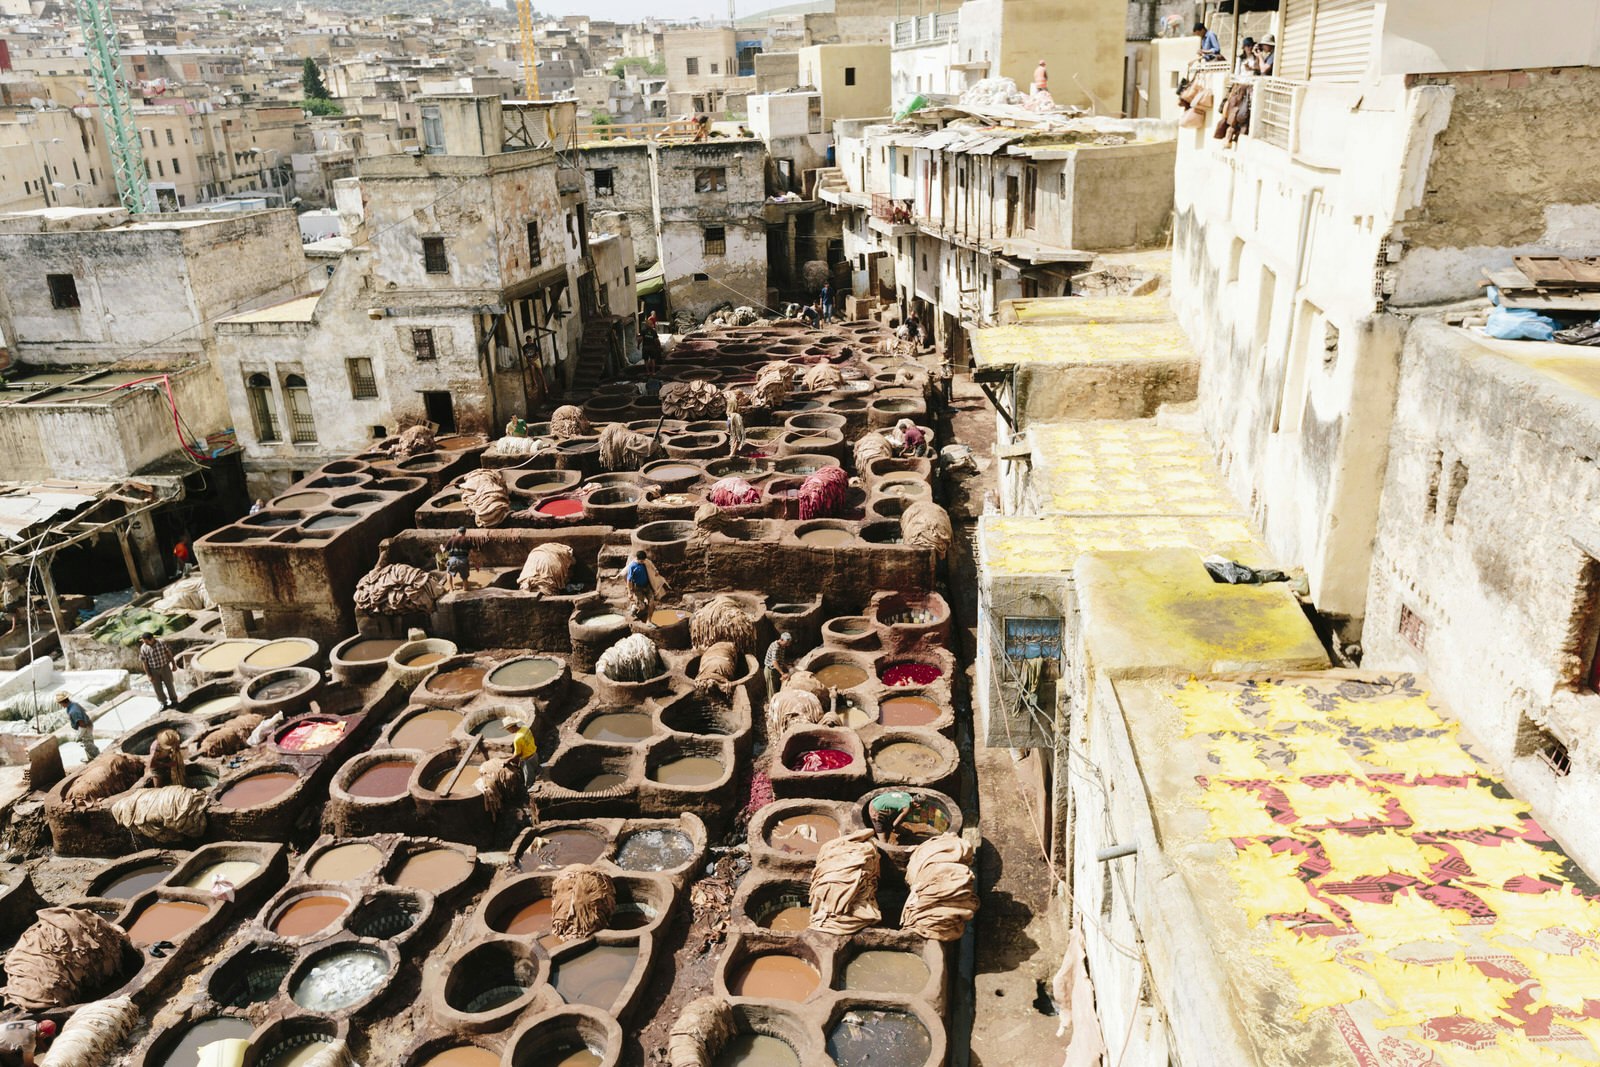 View of workers at the Chaouwara Tanneries in Fez, Morocco